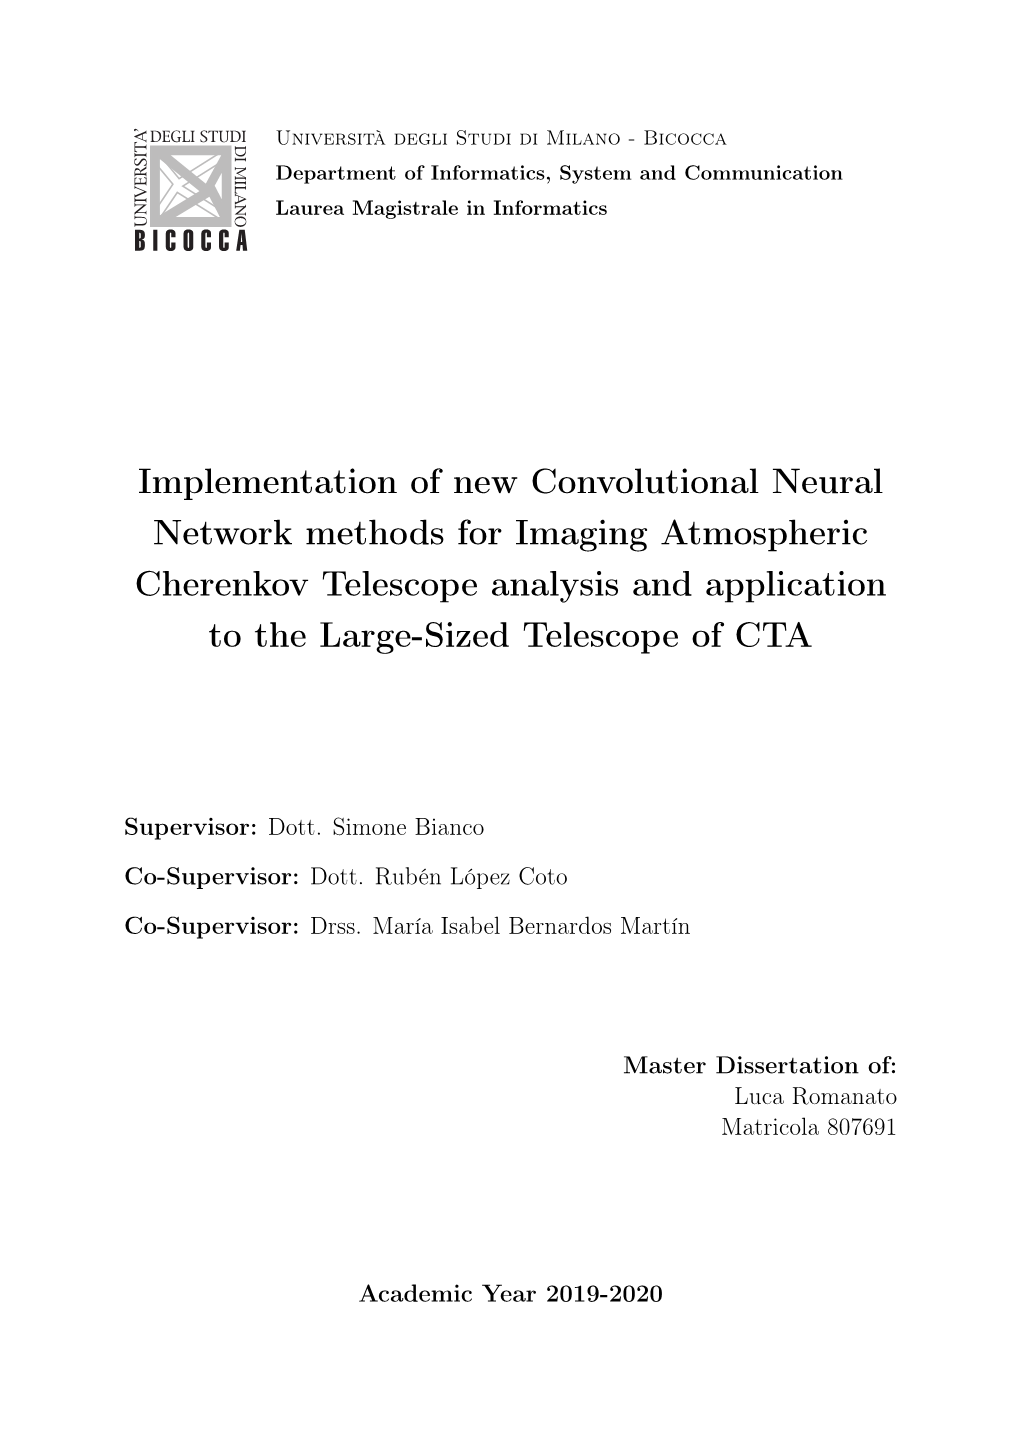 Implementation of New Convolutional Neural Network Methods for Imaging Atmospheric Cherenkov Telescope Analysis and Application to the Large-Sized Telescope of CTA